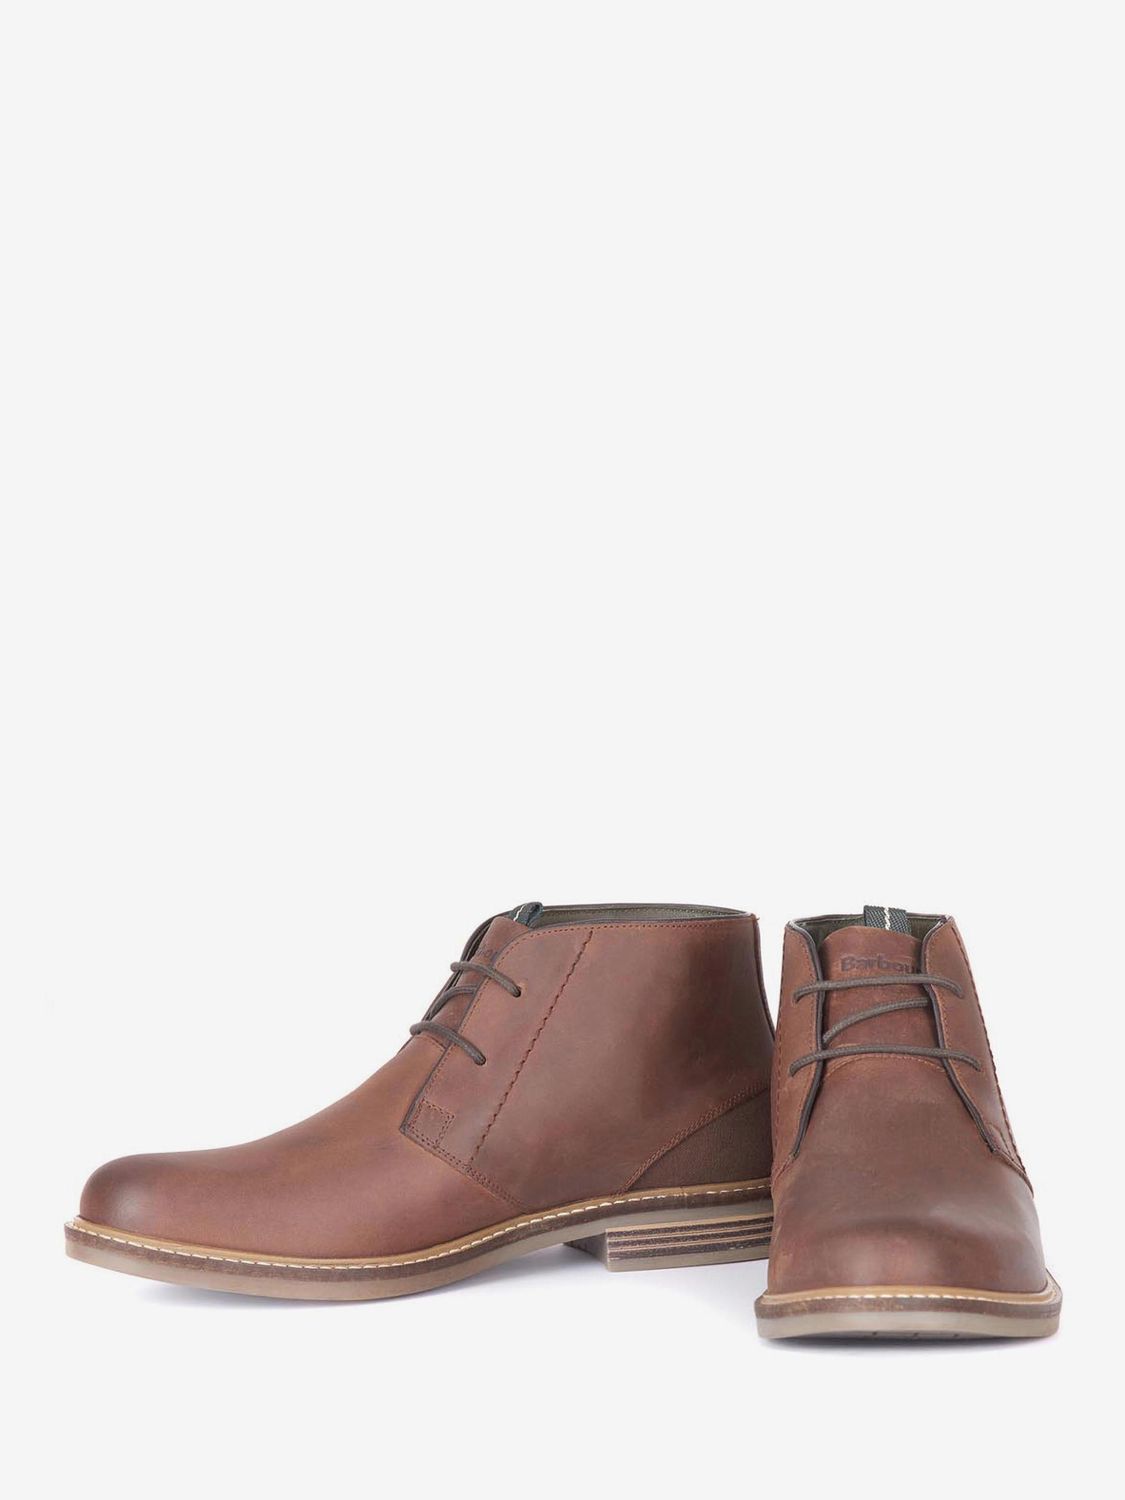 barbour redhead leather chukka boots